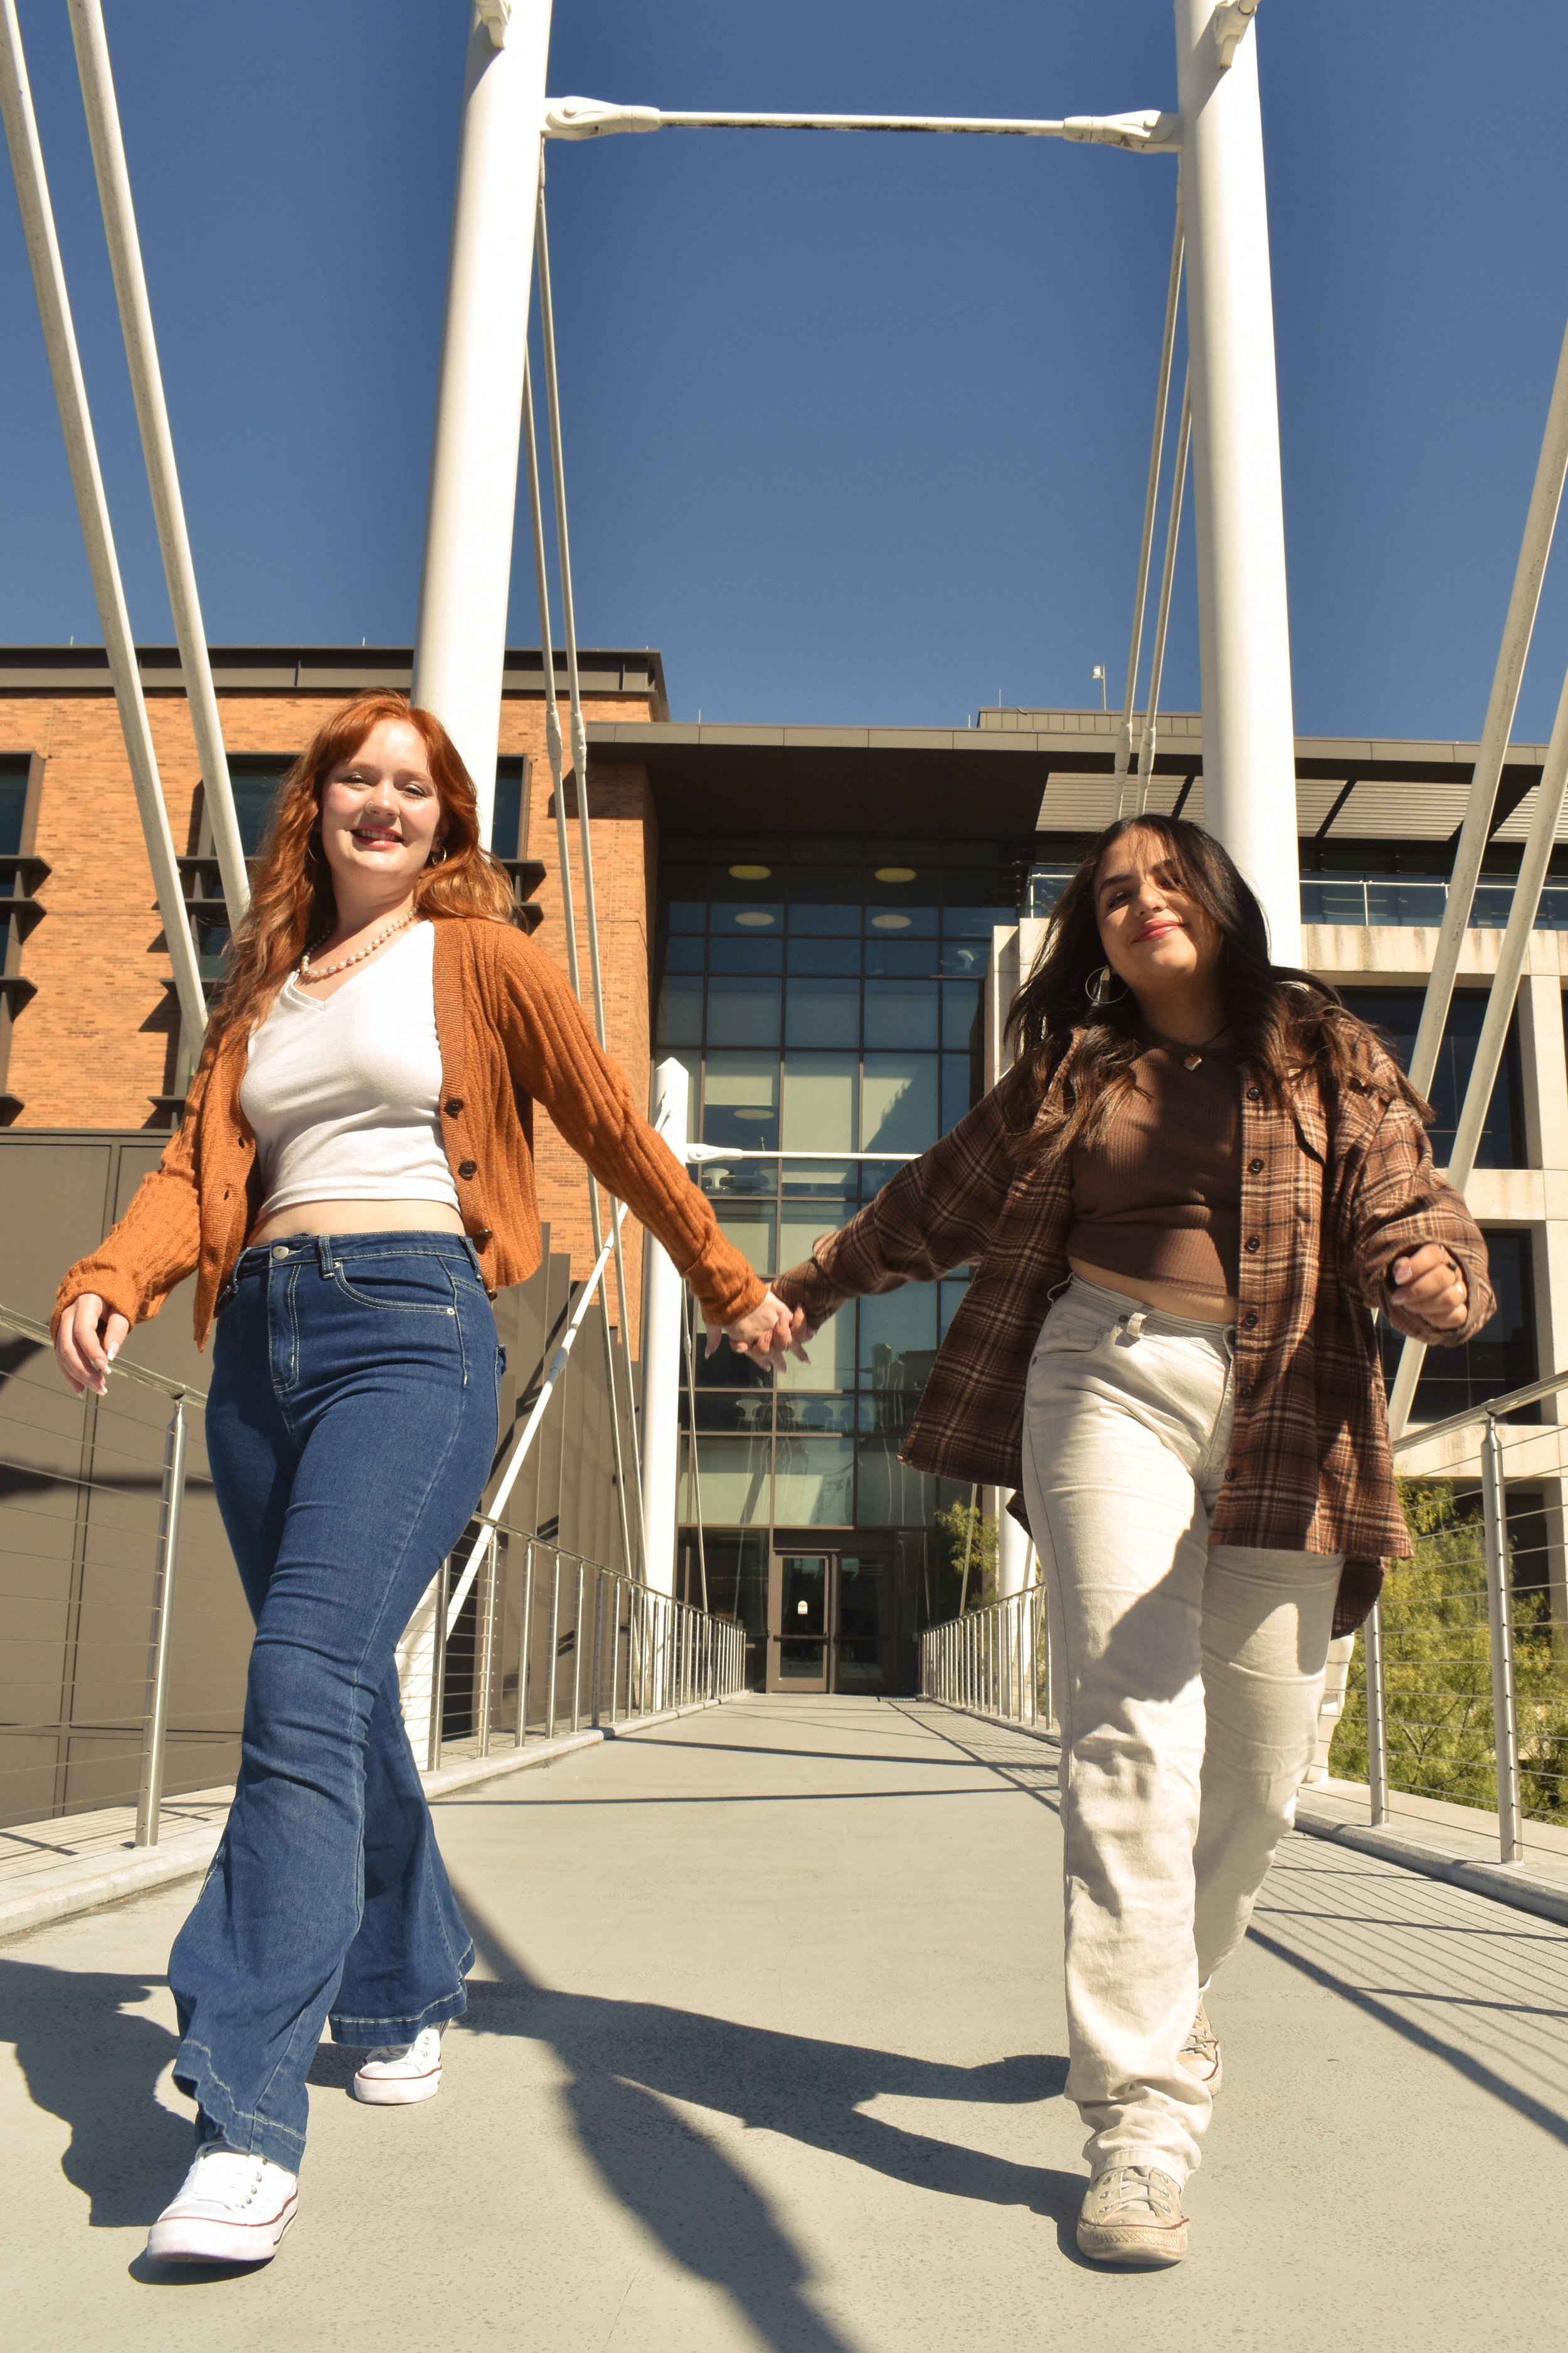   Fearless : Maya Richards (left) and Ana Martinez Villegas (right) skip down the Moody Bridge, reflecting the carefree energy of the  Fearless  album. 